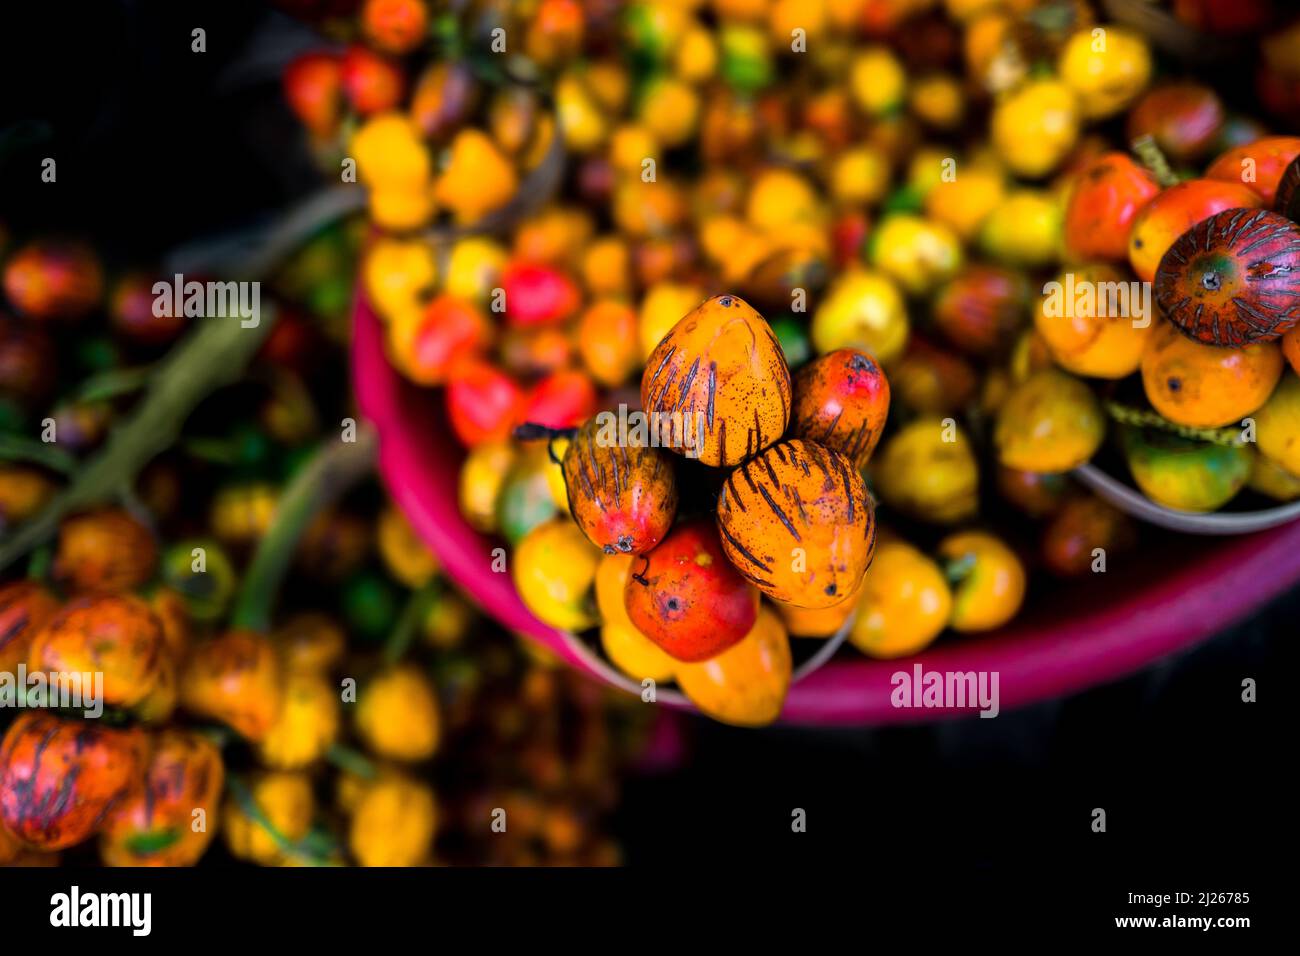 Raw chontaduro (peach palm) fruits are seen offered for sale in a street market in Quibdó, Chocó, Colombia. Stock Photo